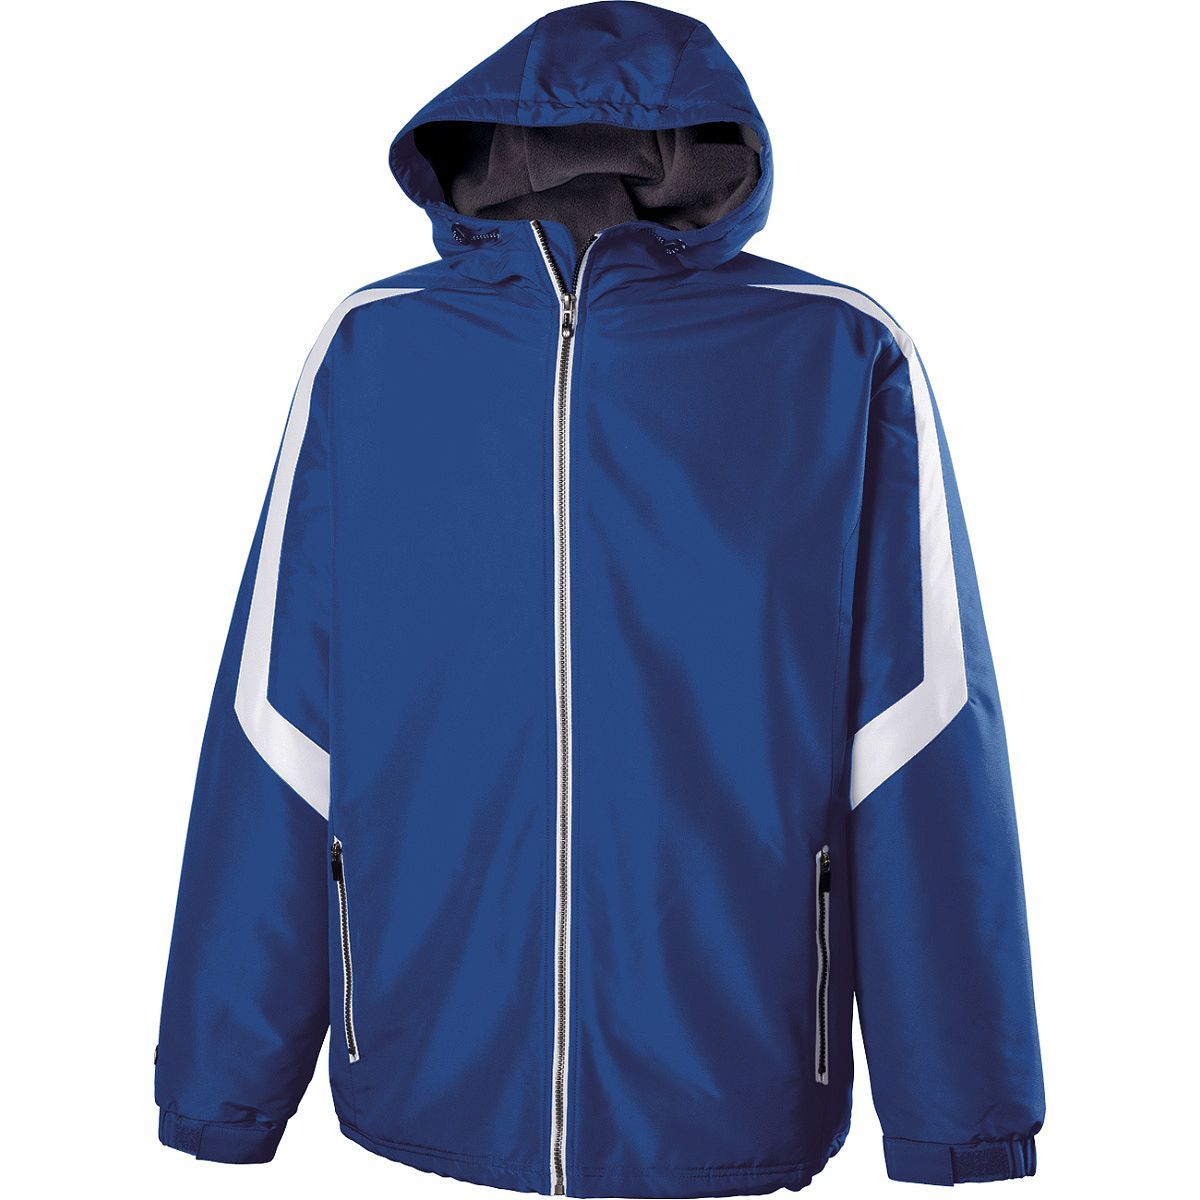 Holloway 229259 - Youth Charger Jacket